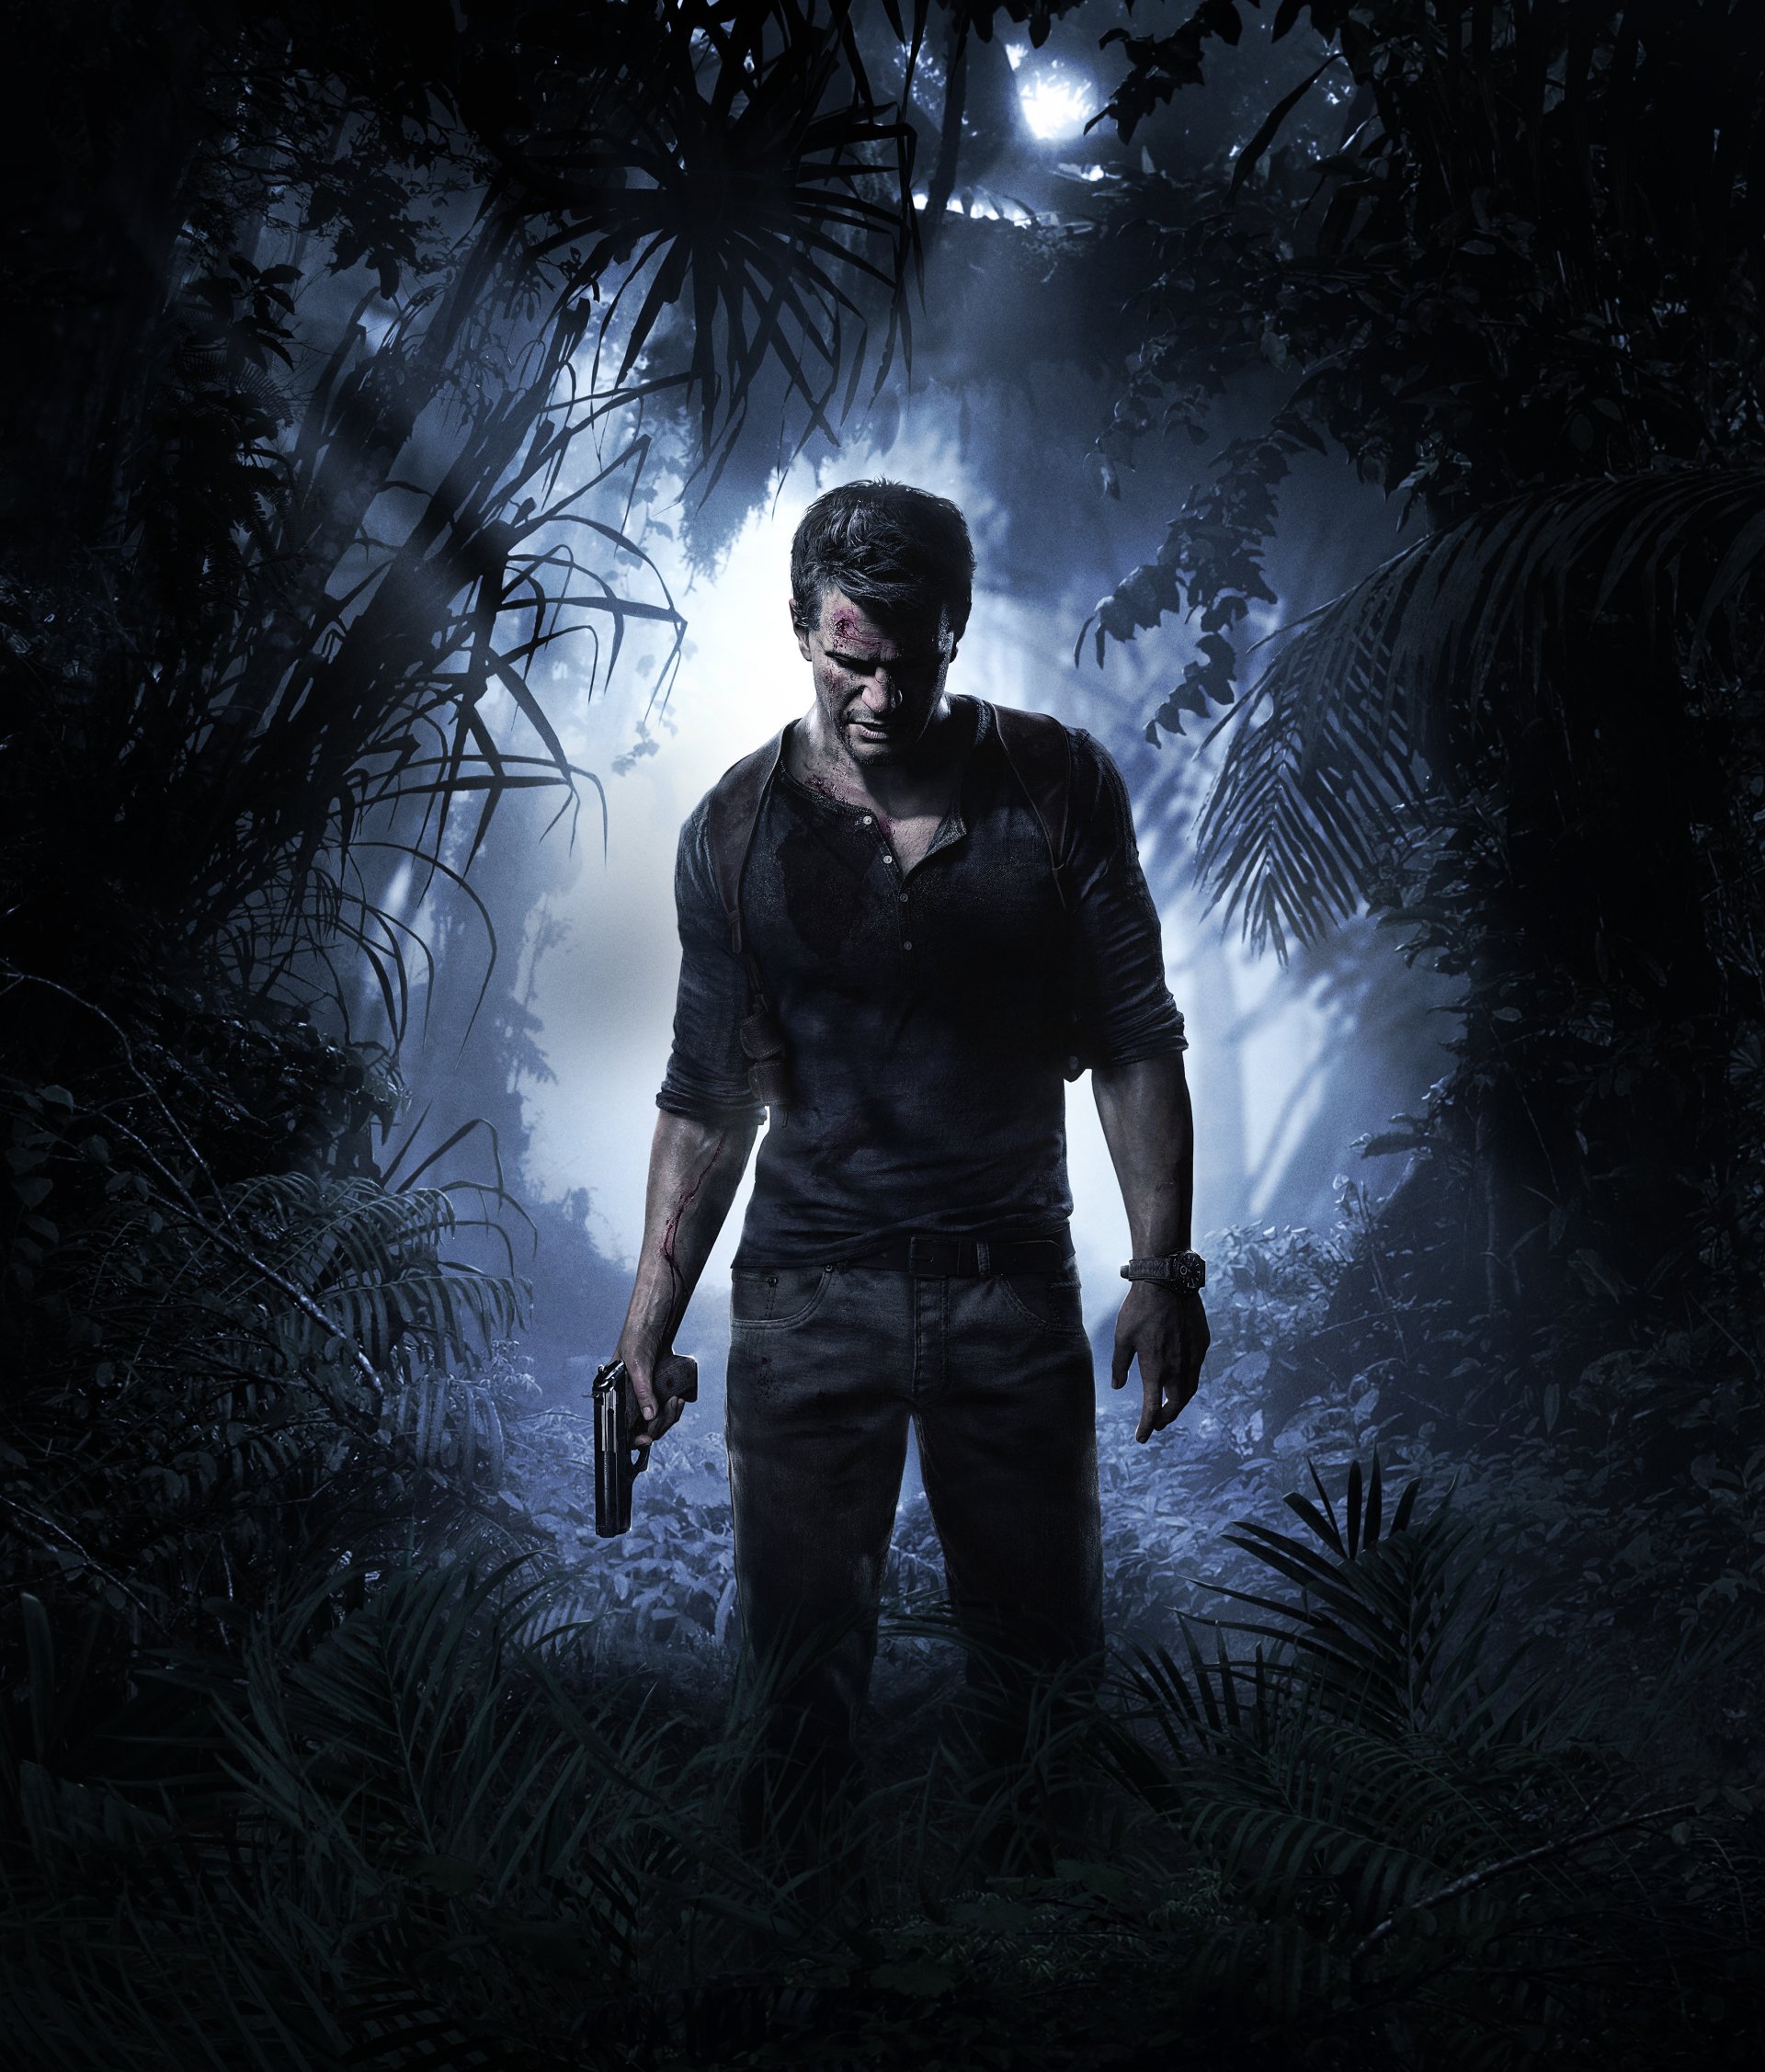 registartion code for uncharted 1 pc